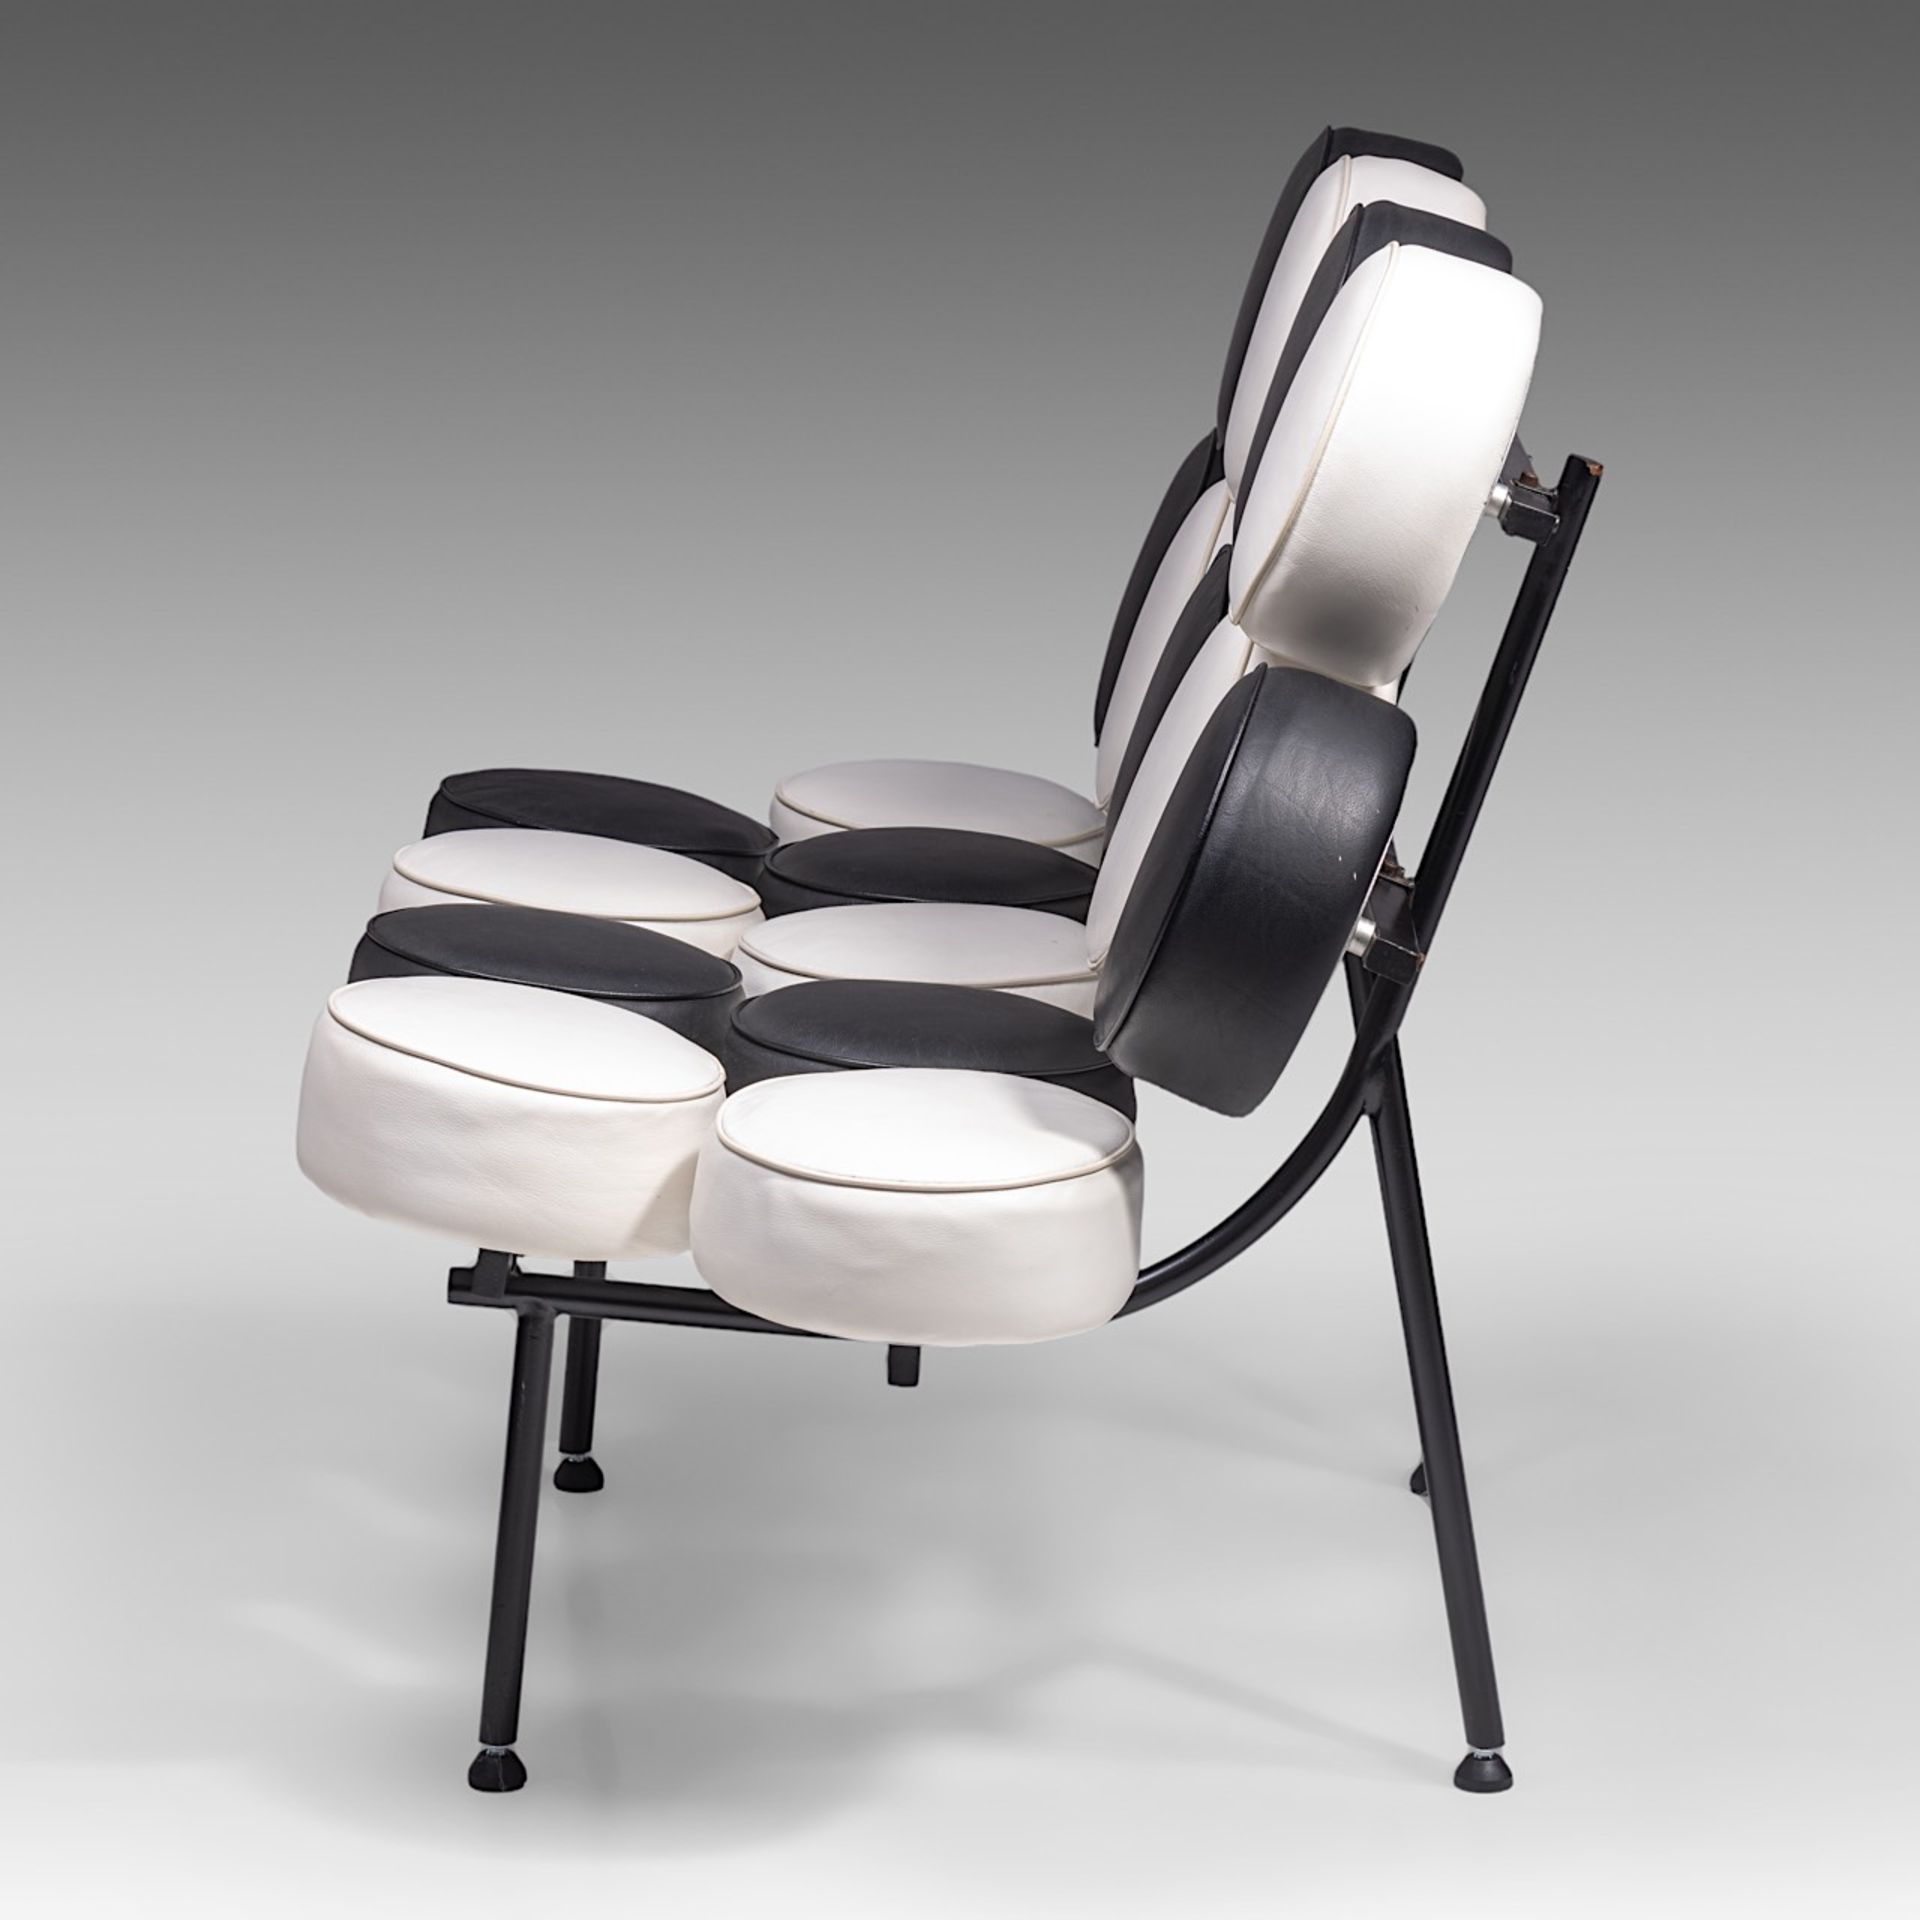 A 'Nelson Marshmallow' Seat, by Irving Harper (1956), H 98 - W 135 cm - Image 3 of 6